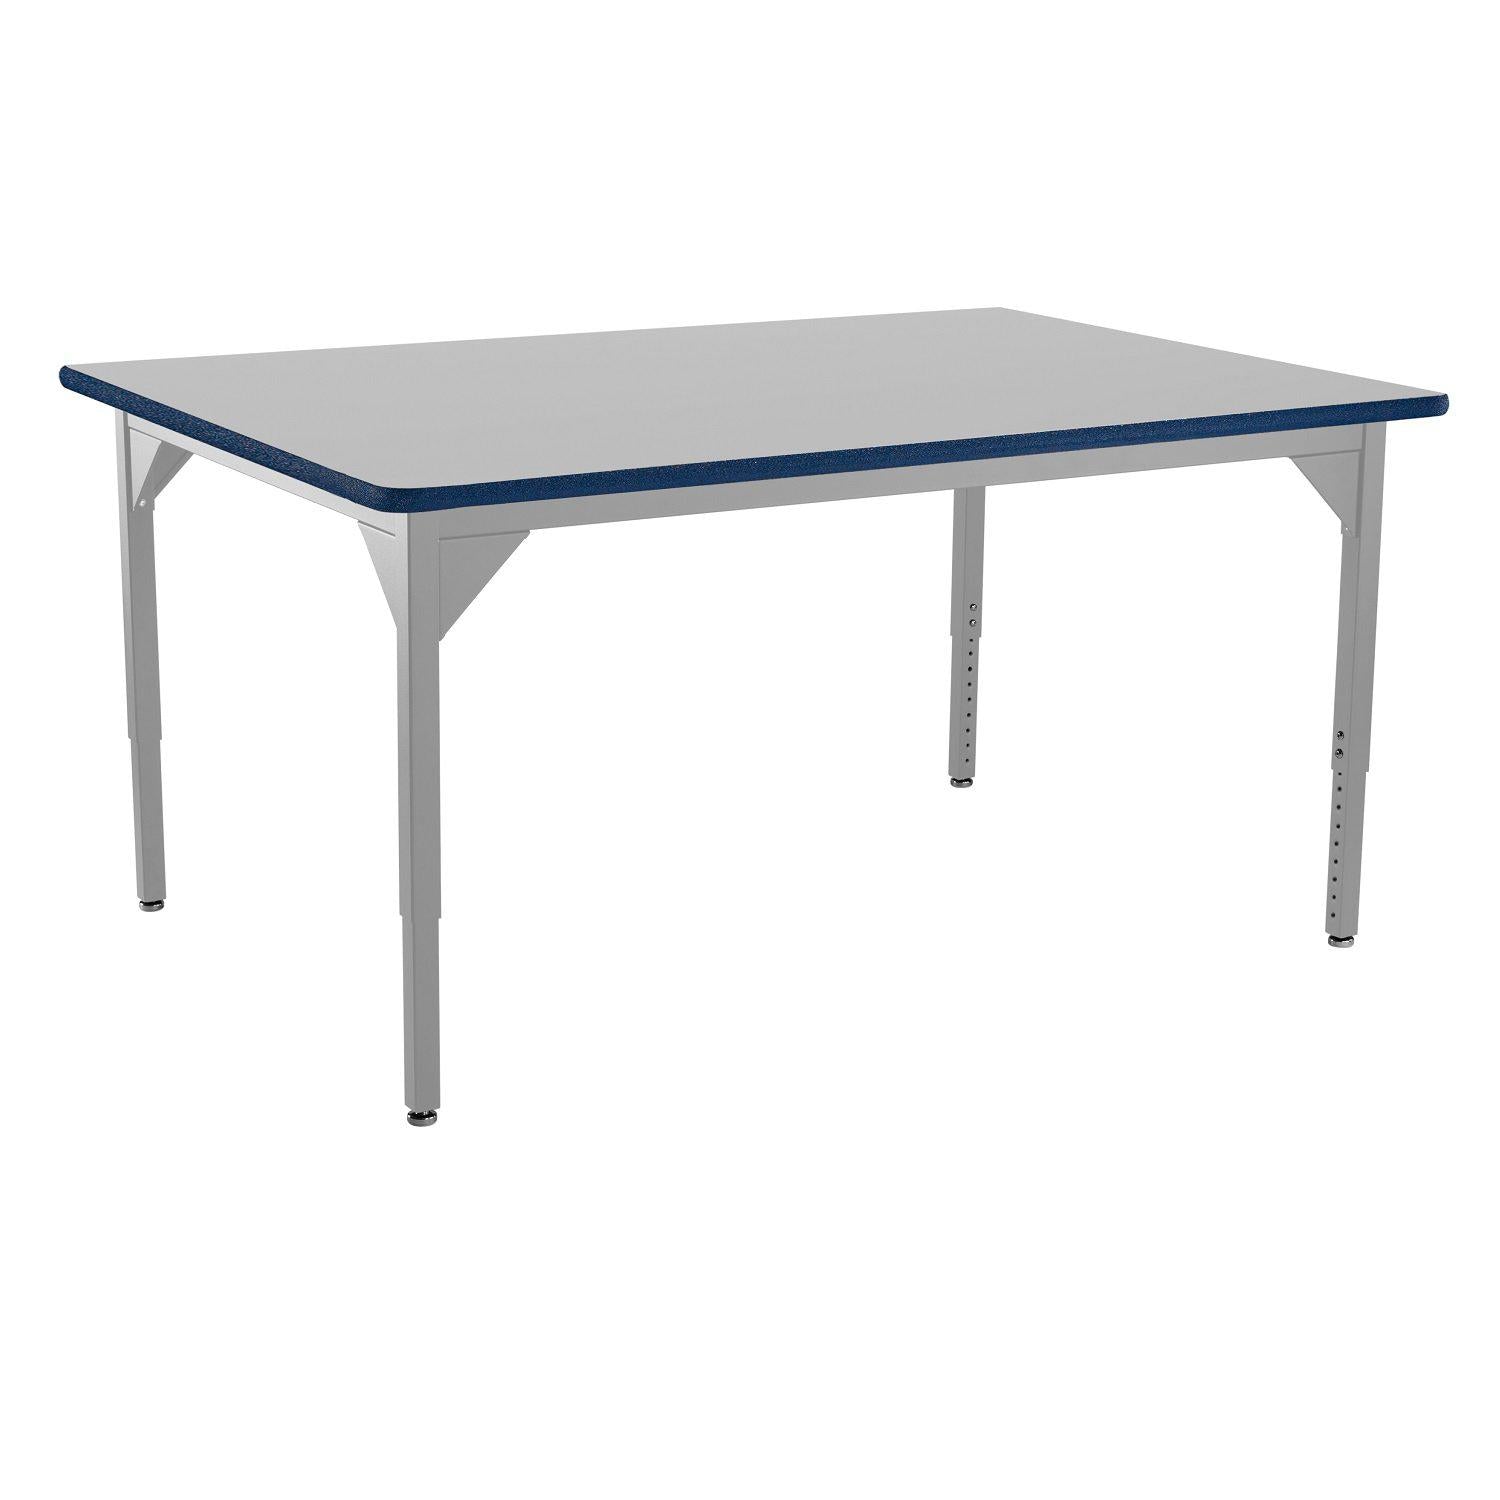 Heavy-Duty Height-Adjustable Utility Table, Soft Grey Frame, 48" x 60", Supreme High-Pressure Laminate Top with Black ProtectEdge